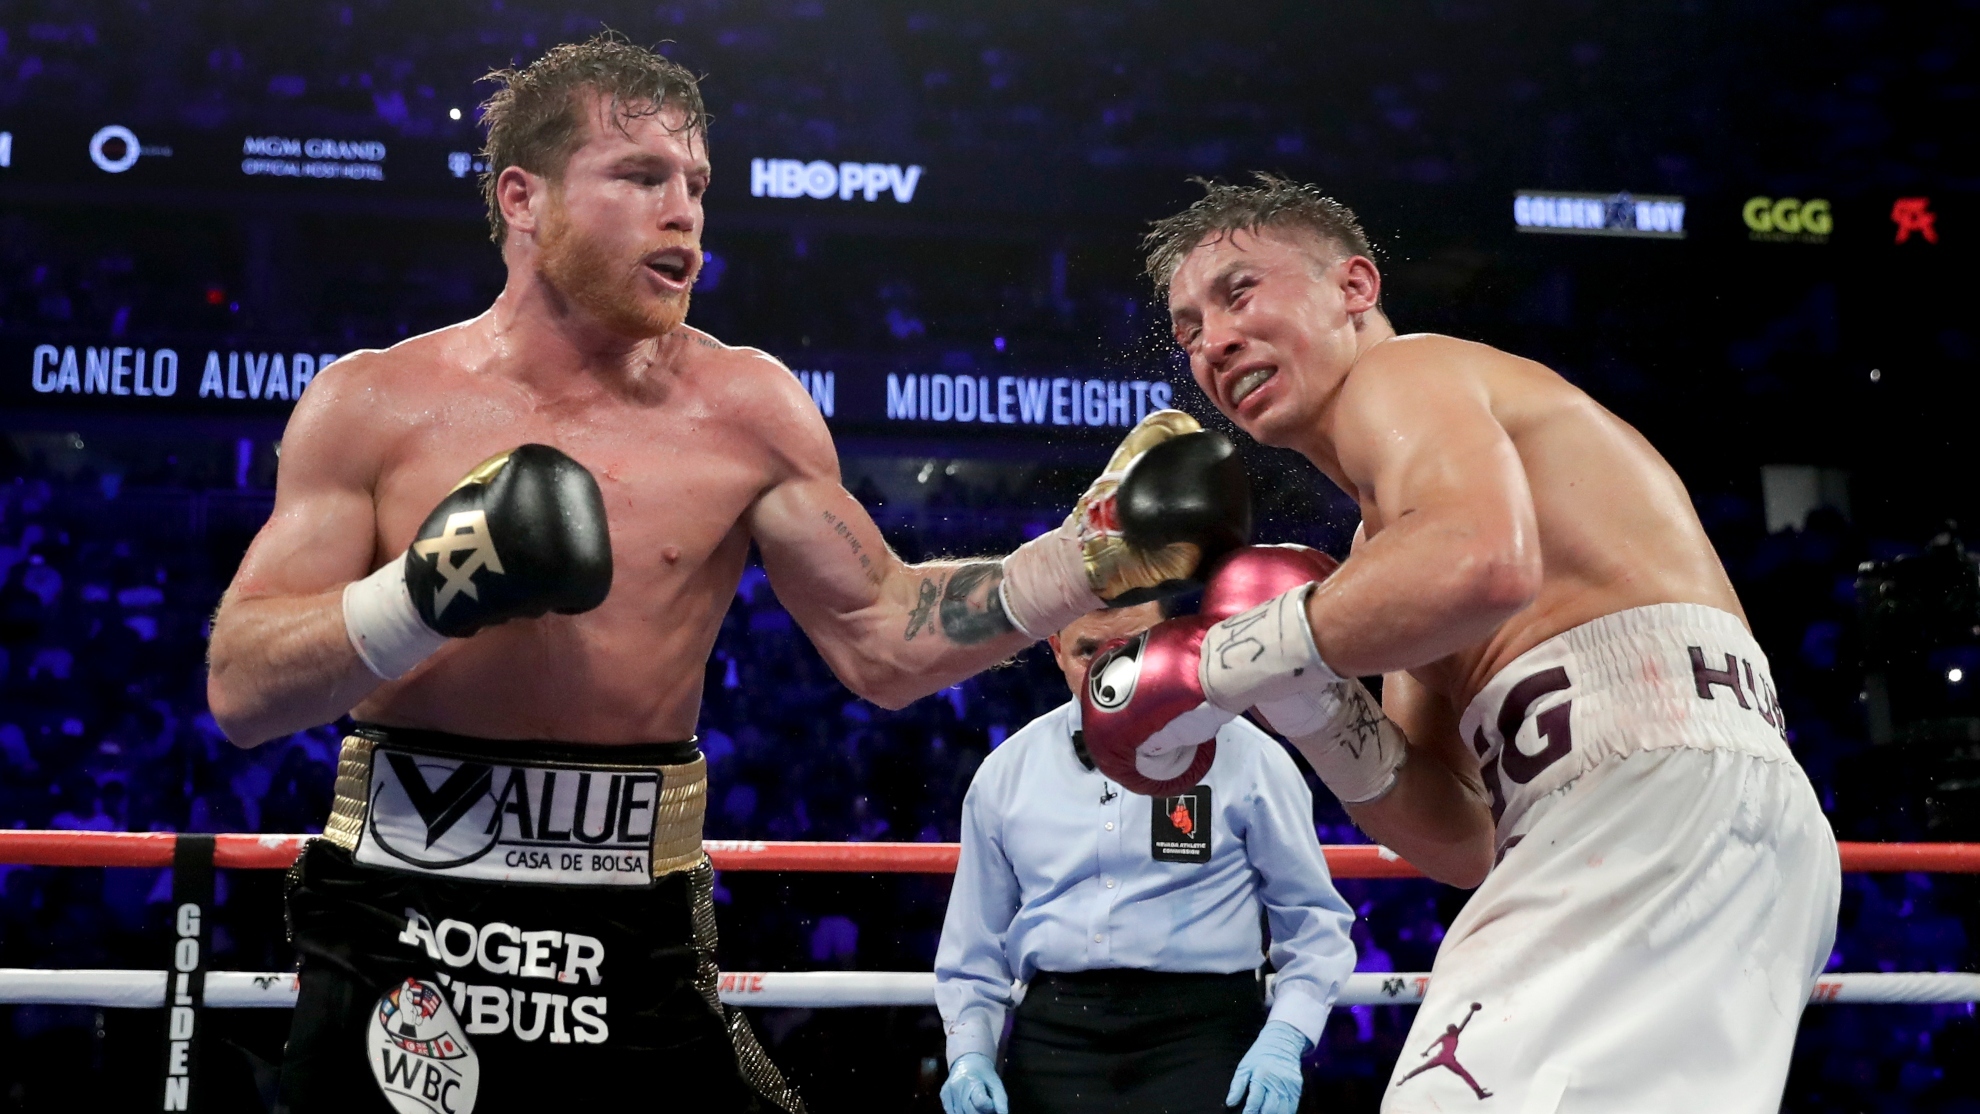 Canelo Alvarez lands a punch against Gennady Golovkin in the 12th round during a middleweight title boxing match, on Sept. 15, 2018, in Las Vegas